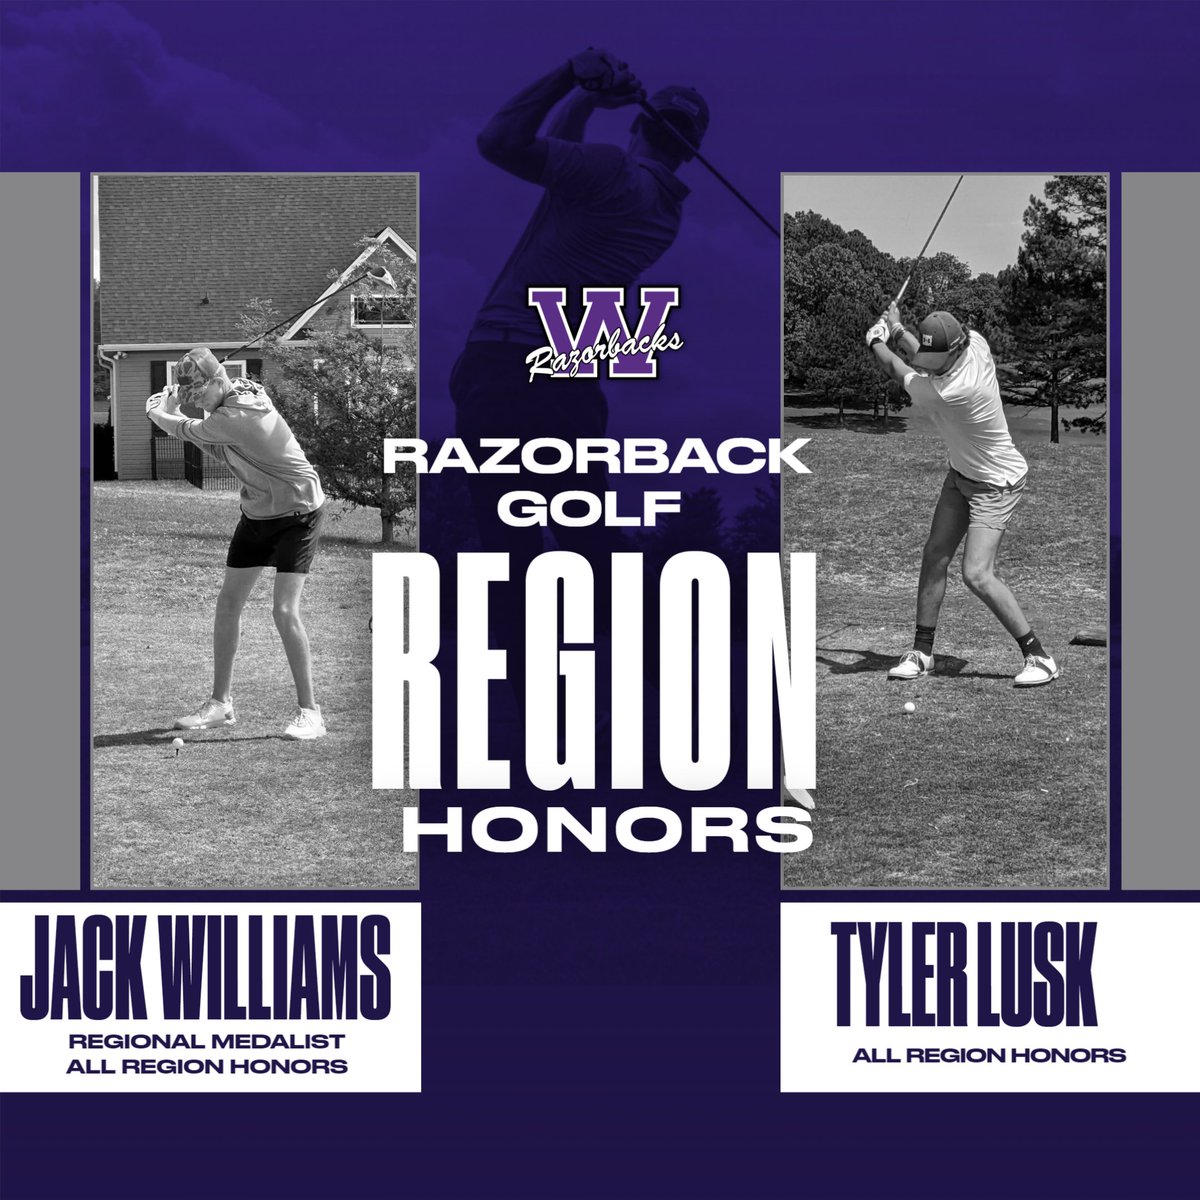 Aside from qualifying for the Upper State tournament, Razorback Golf received individual region honors on Monday.

Jack Williams - REGIONAL MEDALIST & ALL REGION

Tyler Lusk - ALL REGION

Congrats to Jack & Tyler on these HIGH HONORS!!

#OnToTheNext

#PurpleStateOfMind